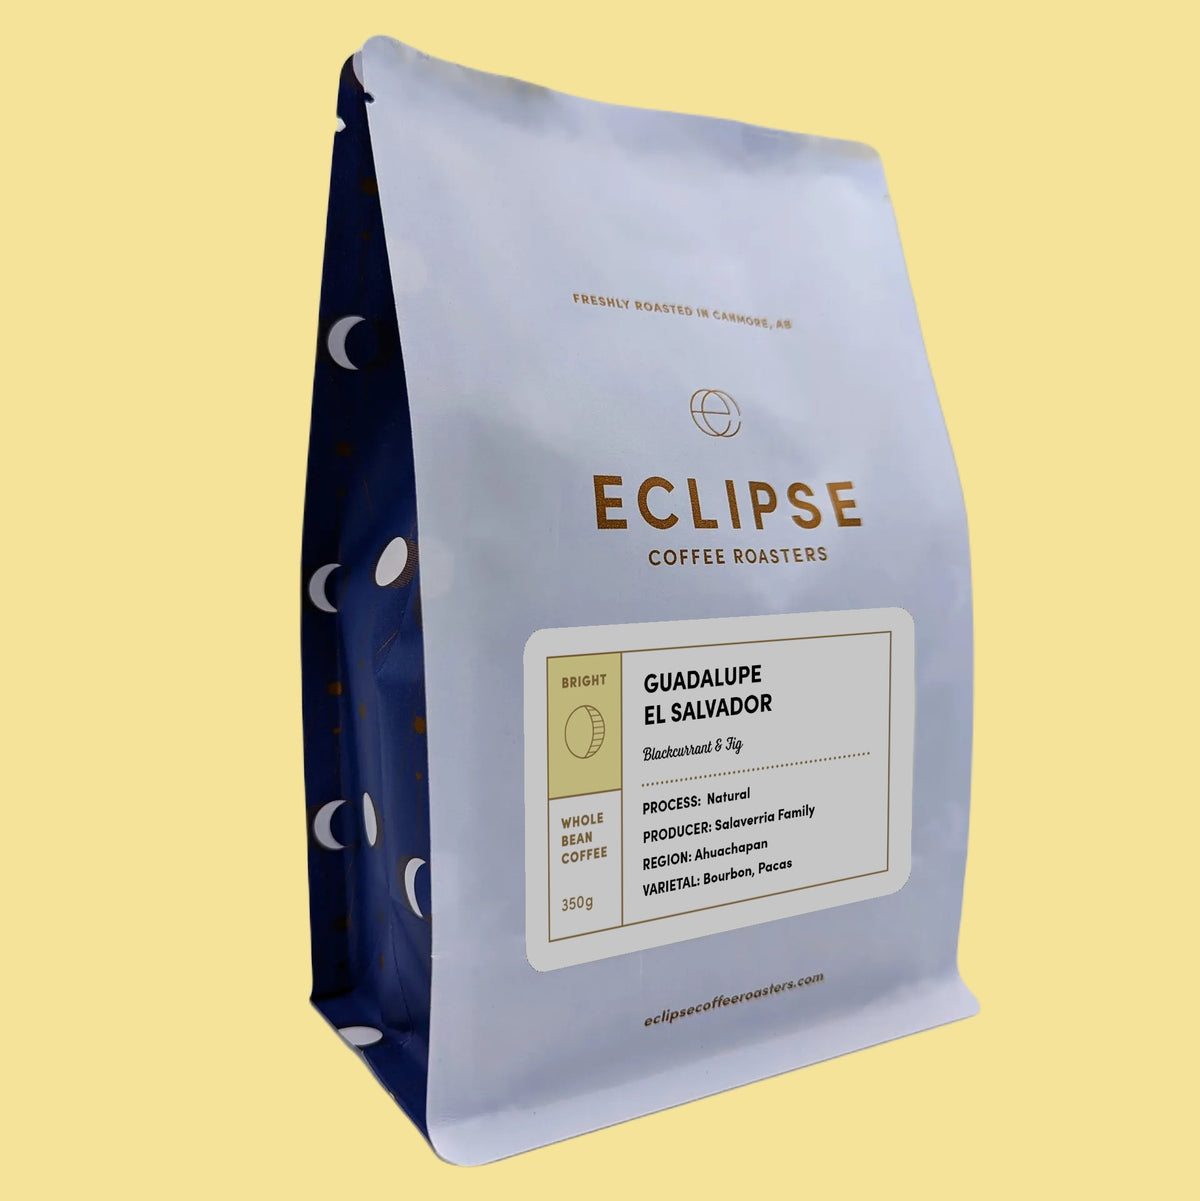 Guadalupe El Salvador - Green Coffee Beans 600g